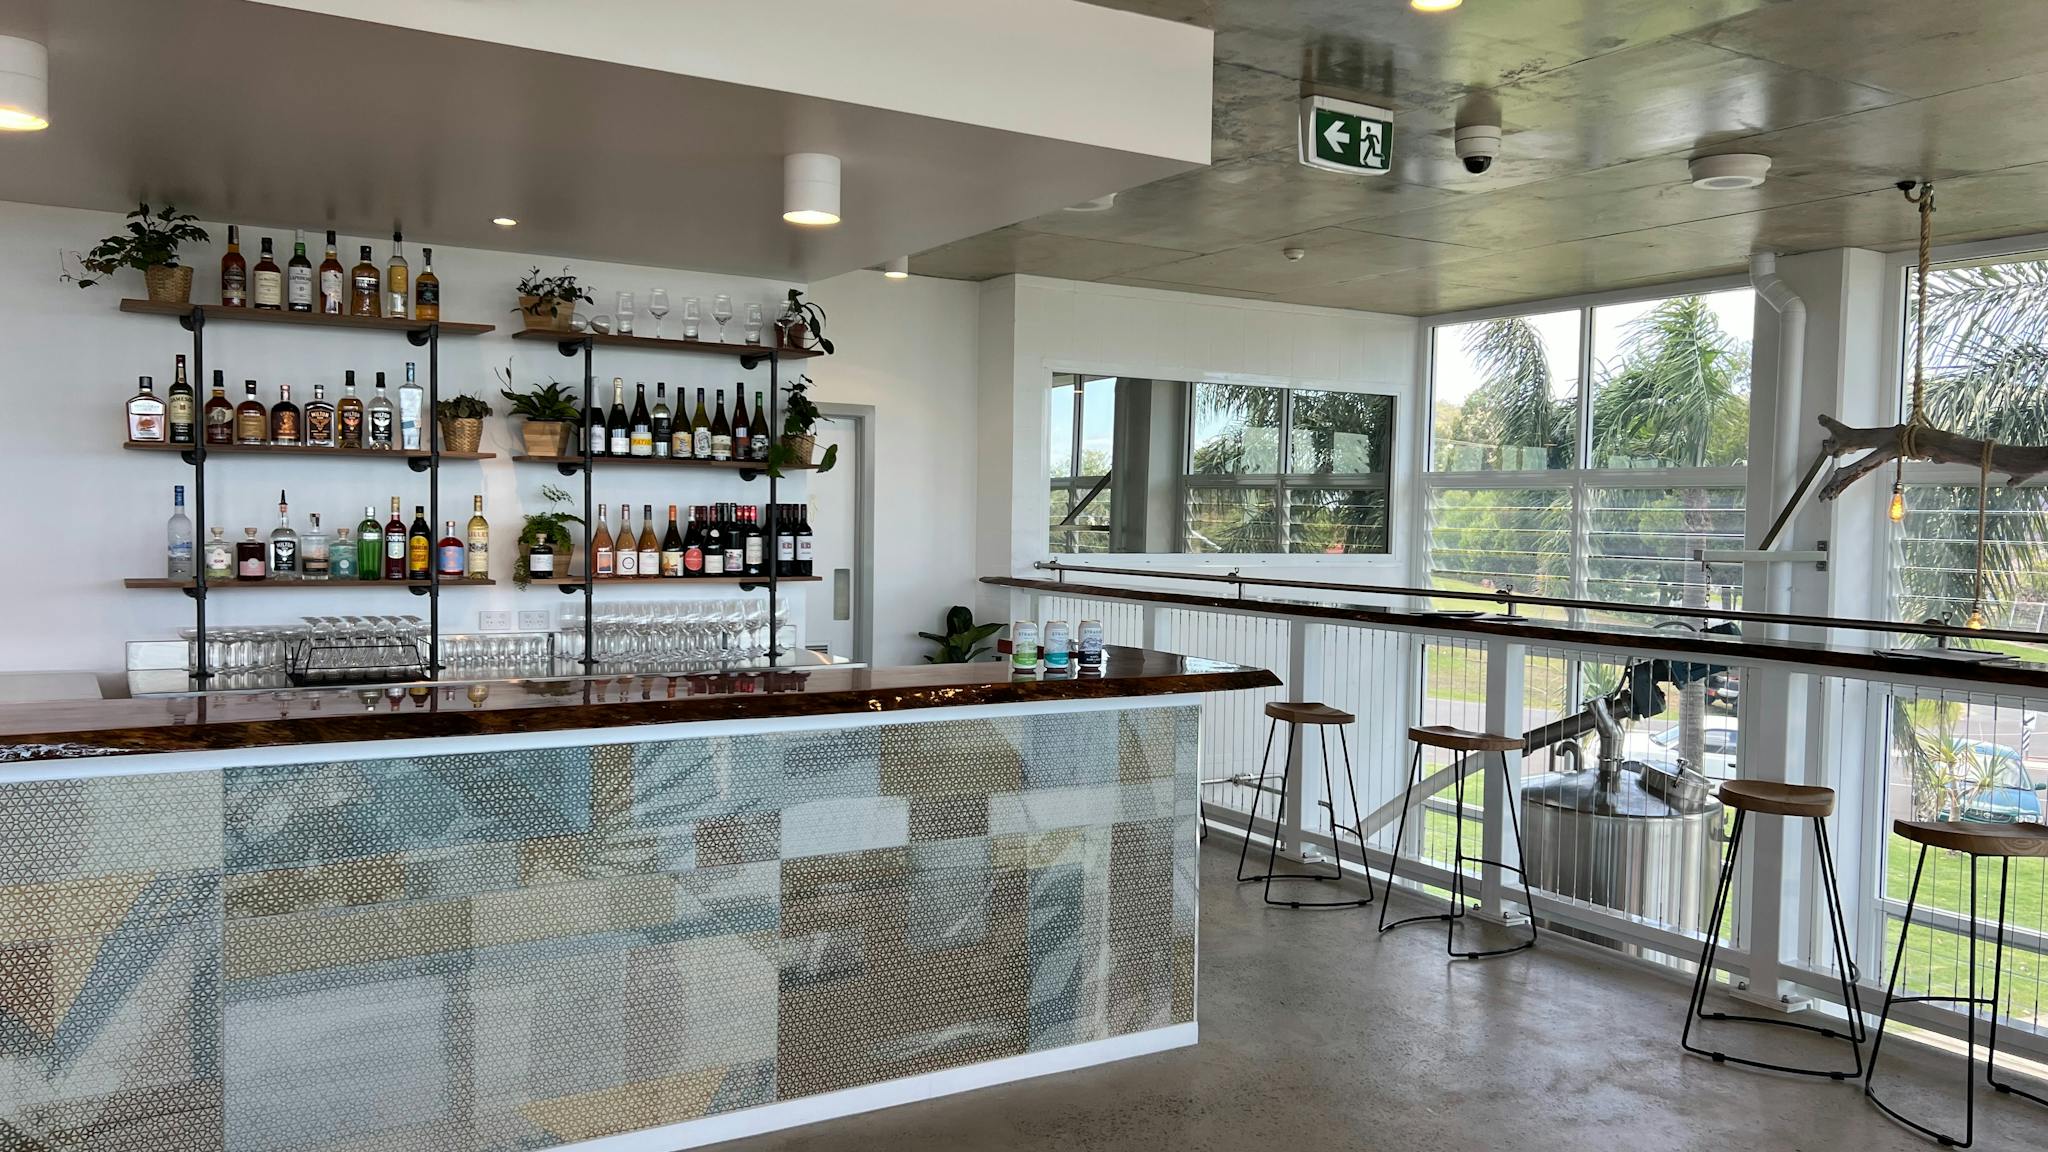 Taproom bar showing bottle of wine and spirits